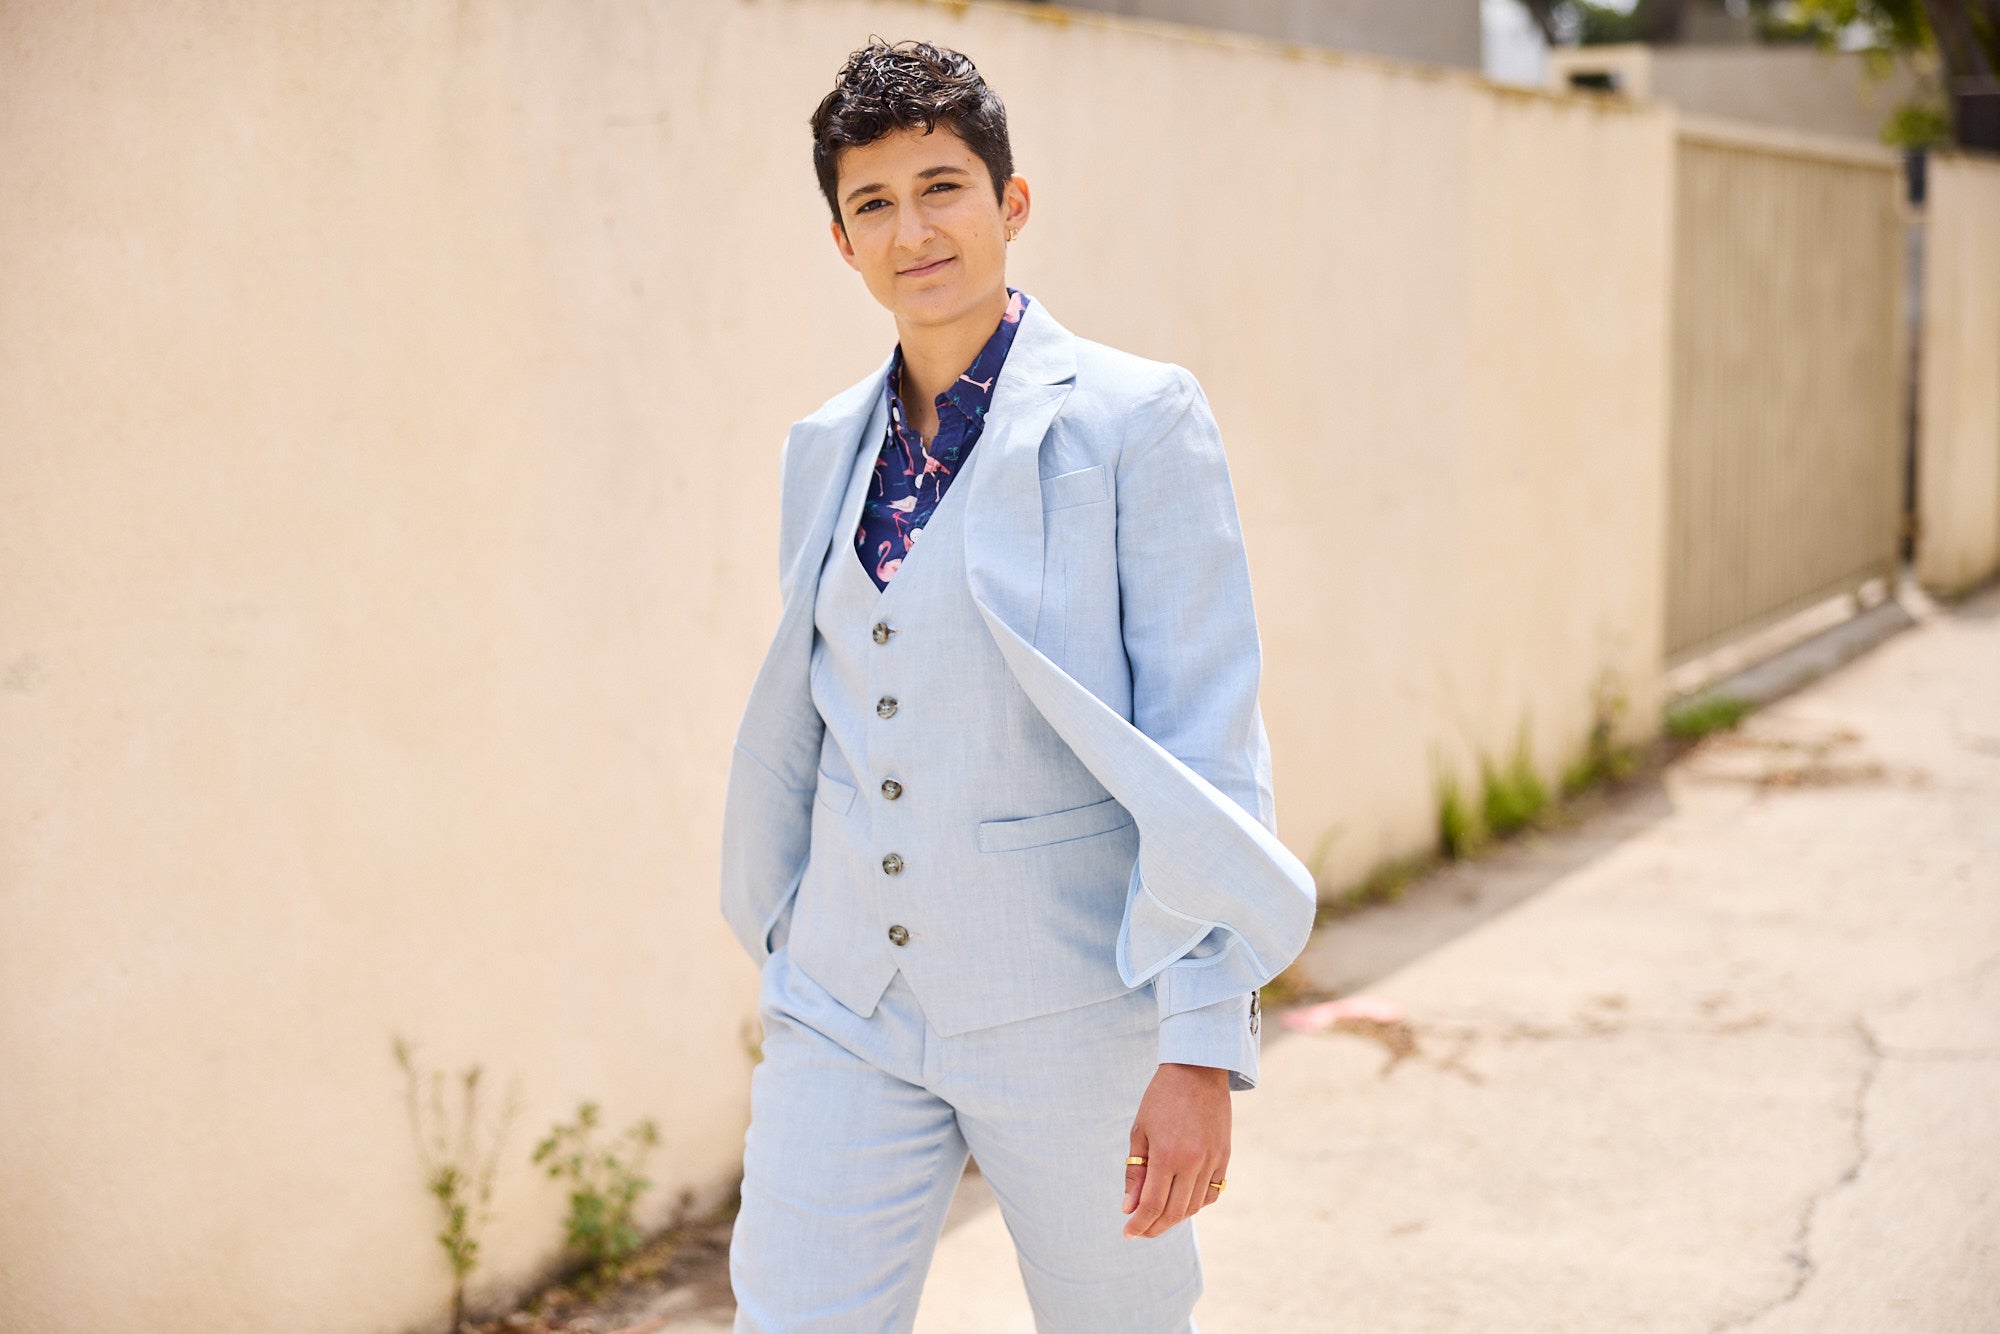 walking out in linen LGBTQ+ suit for women